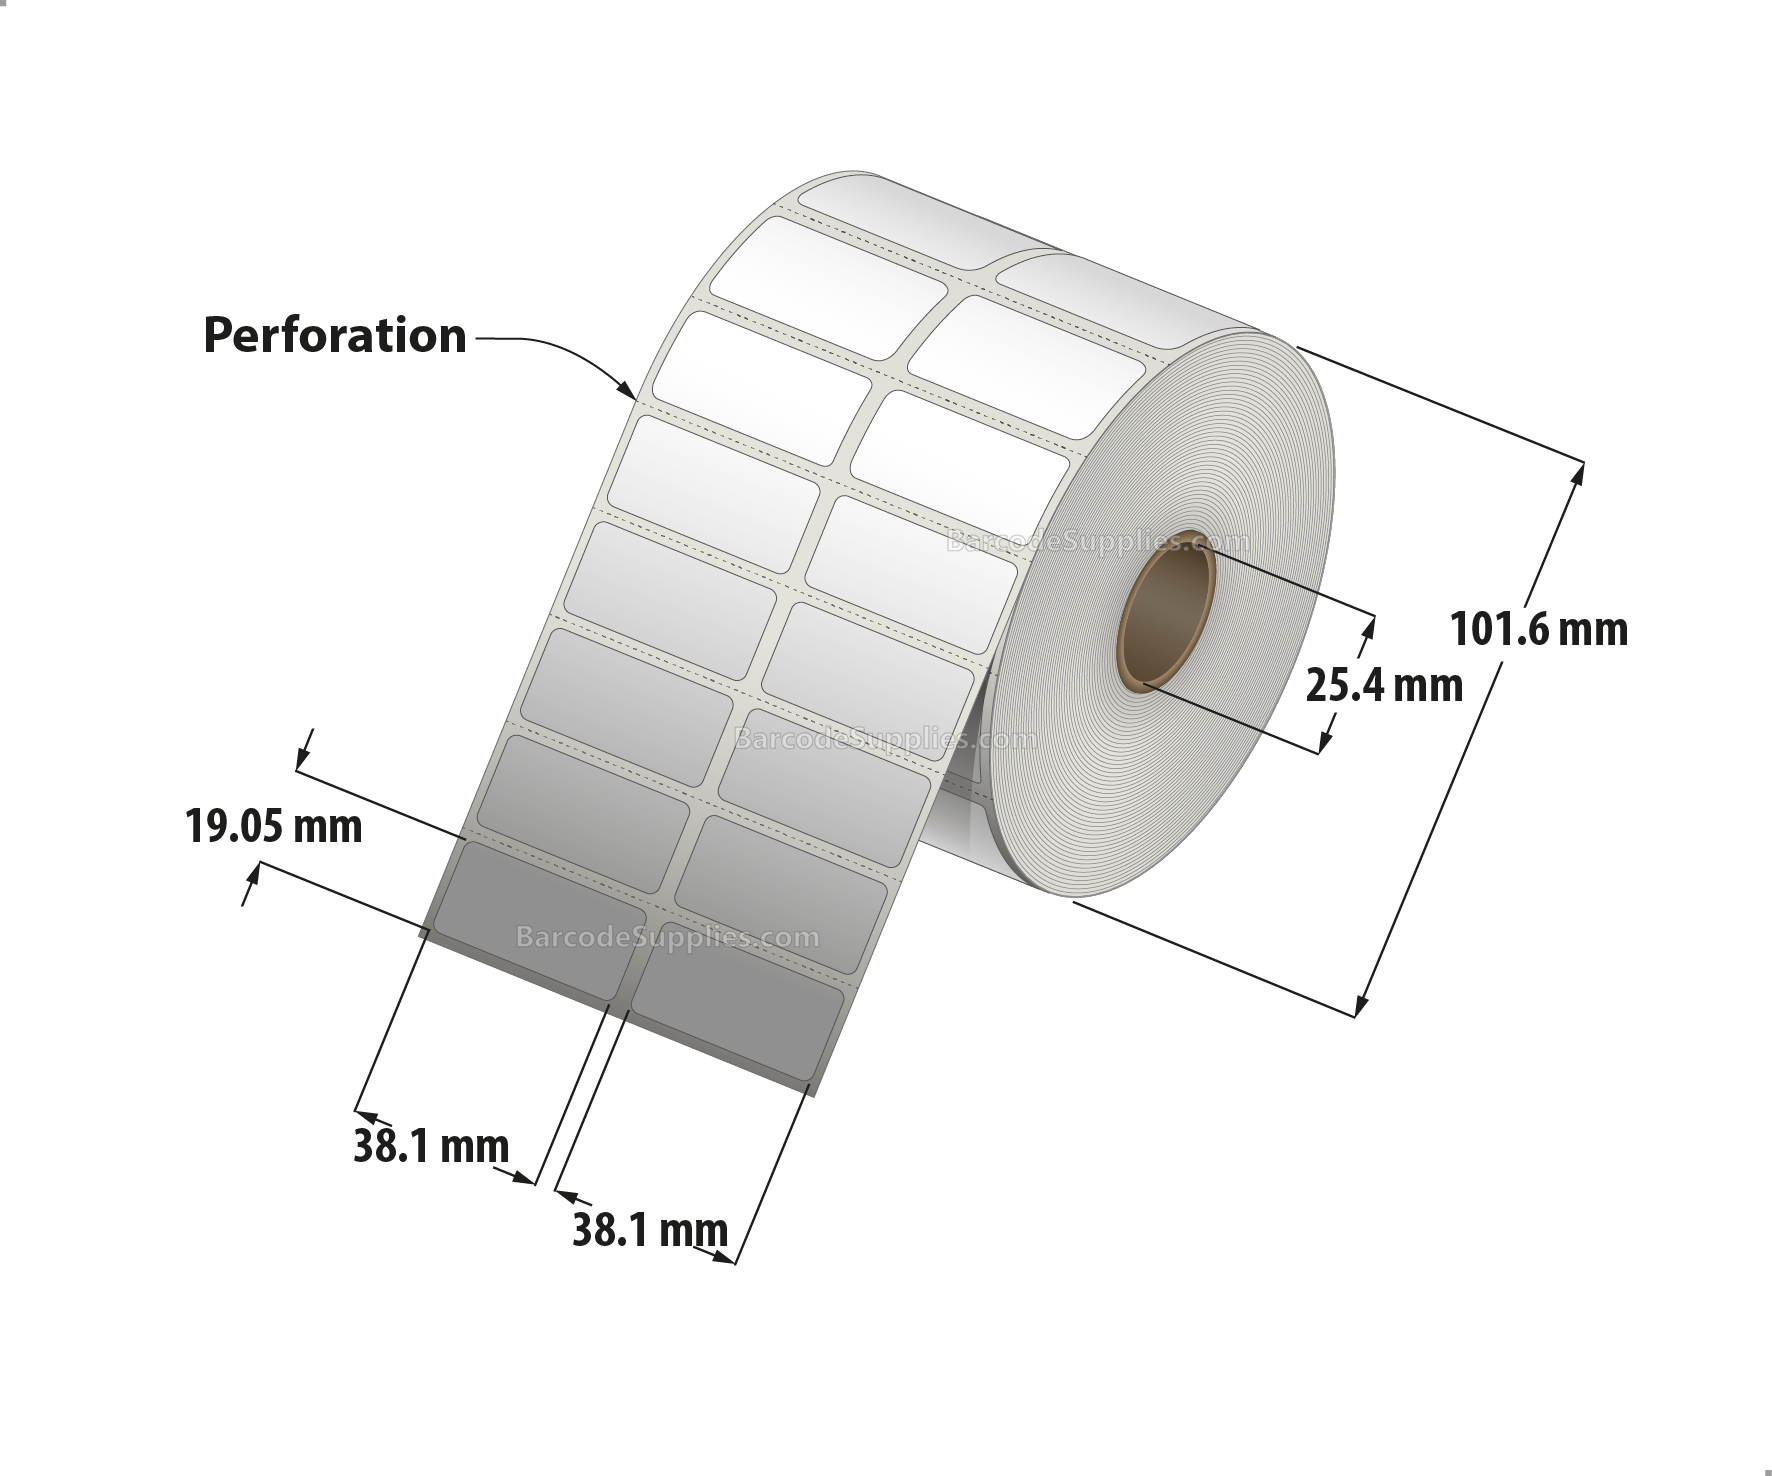 1.5 x 0.75 Direct Thermal White Labels With Acrylic Adhesive - Perforated - 3500 Labels Per Roll - Carton Of 12 Rolls - 42000 Labels Total - MPN: RD-15-075-3500-1